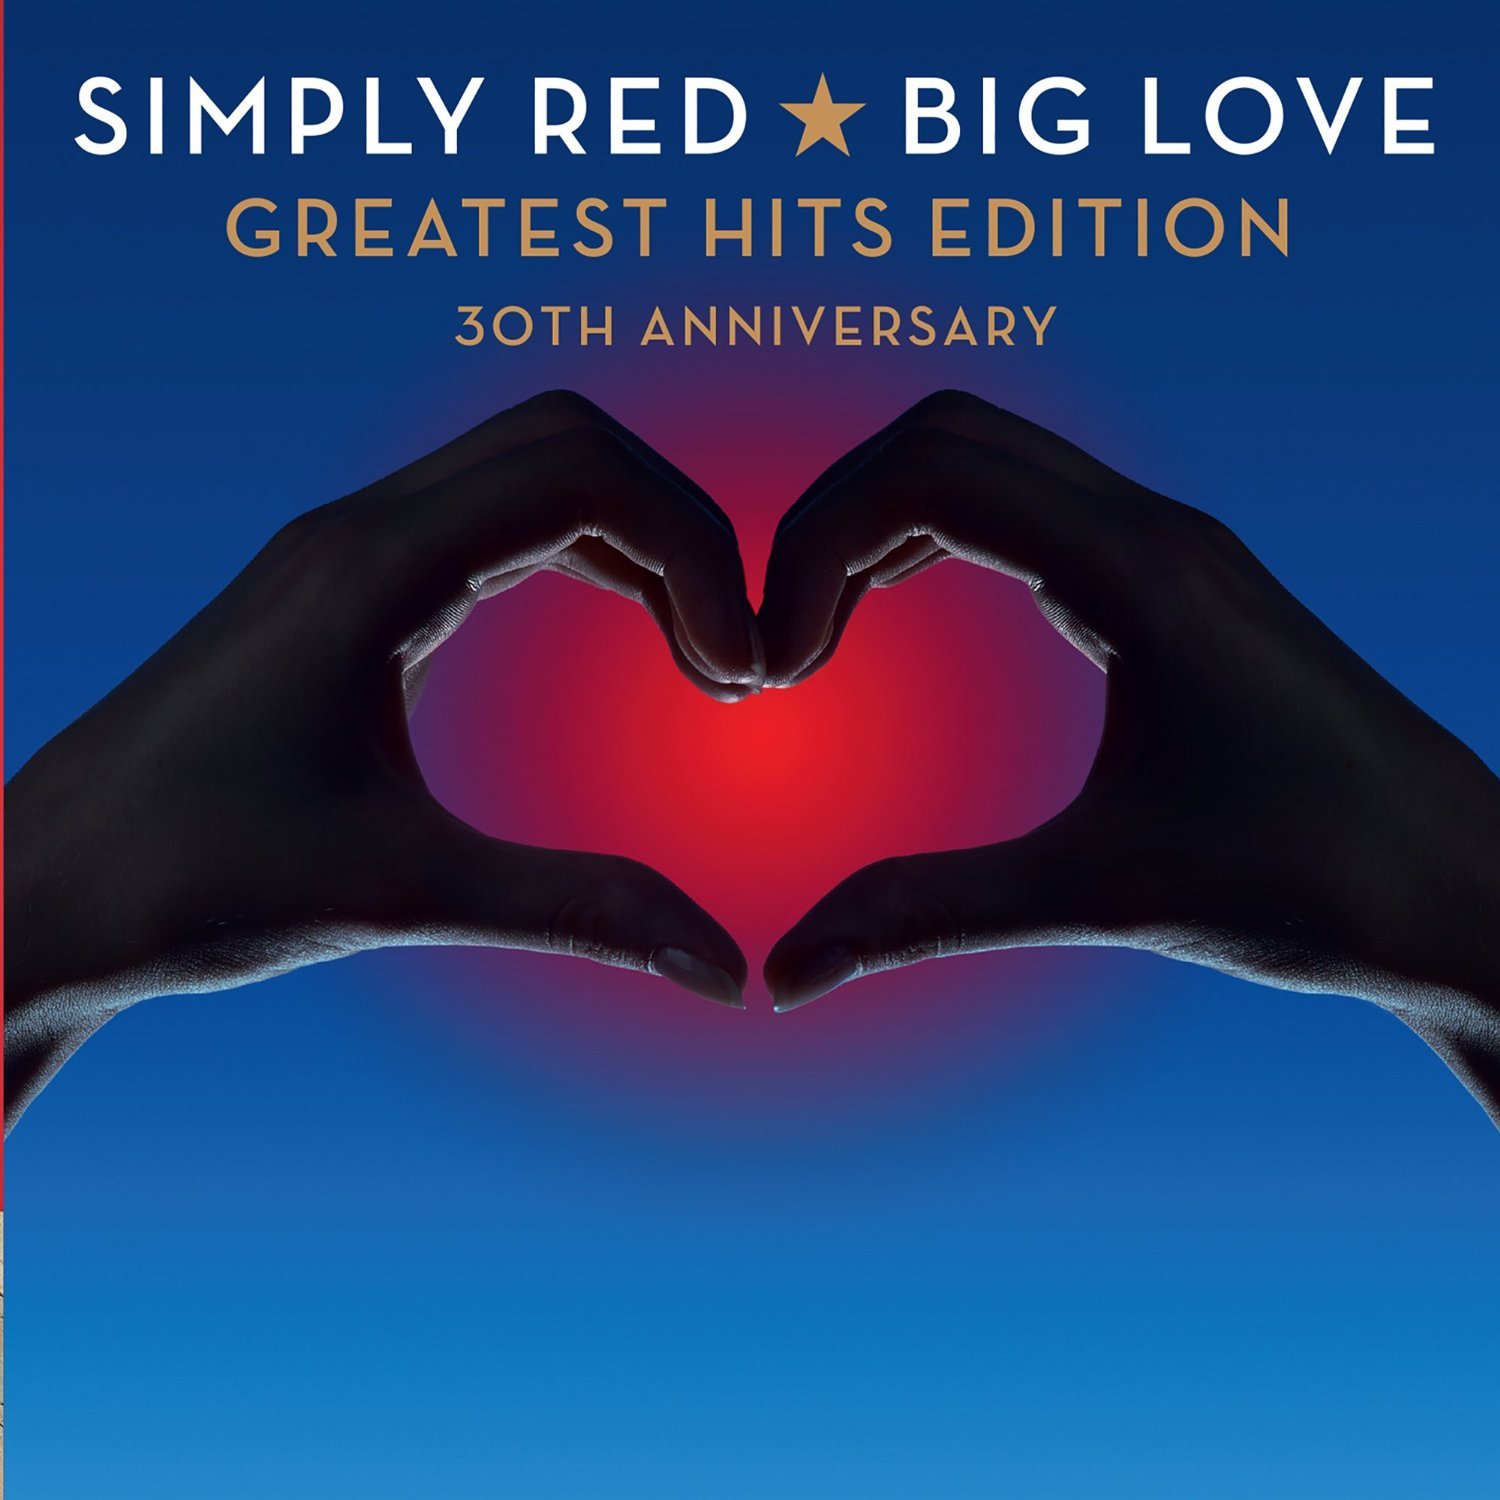 Simply life. Big Love simply Red. Simply Red Life. The Greatest Hits simply Red. Simply Red "big Love (CD)".